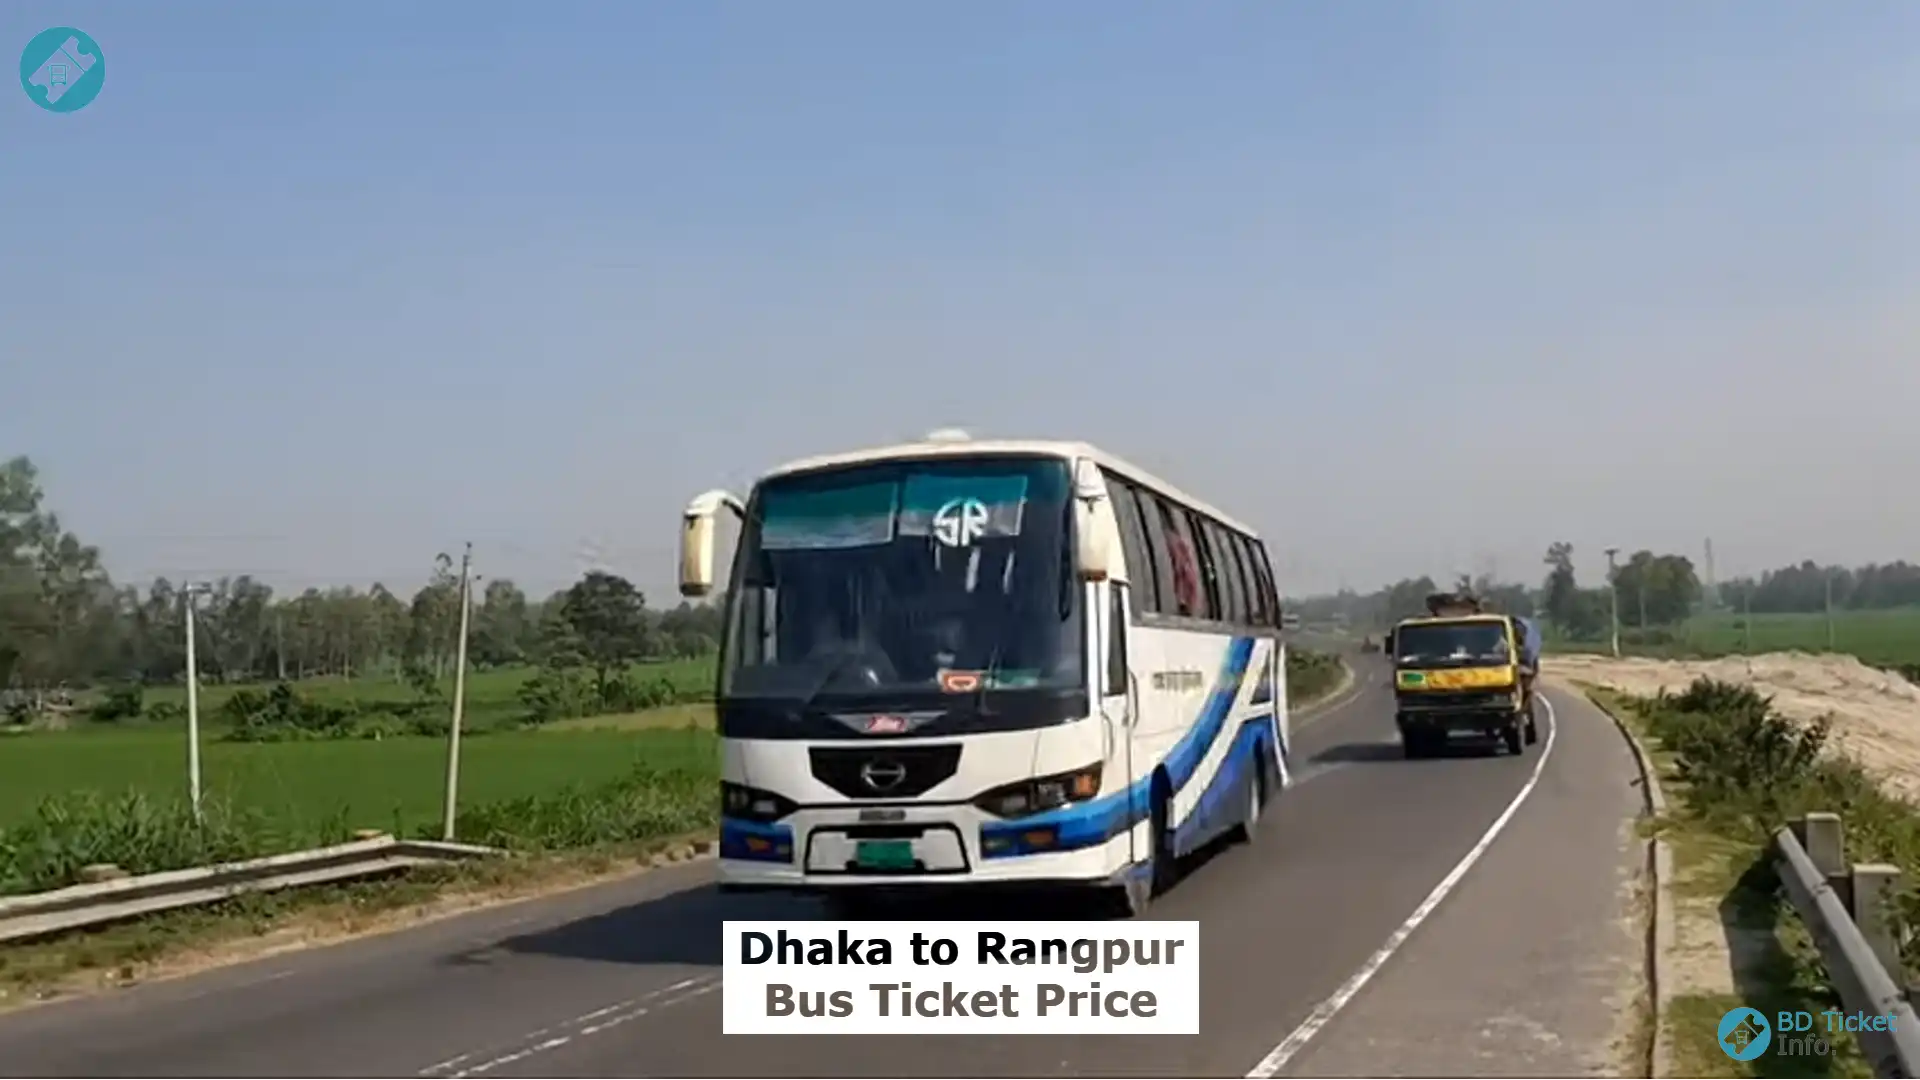 Dhaka to Rangpur Bus Ticket Price, Schedule and Counter Number